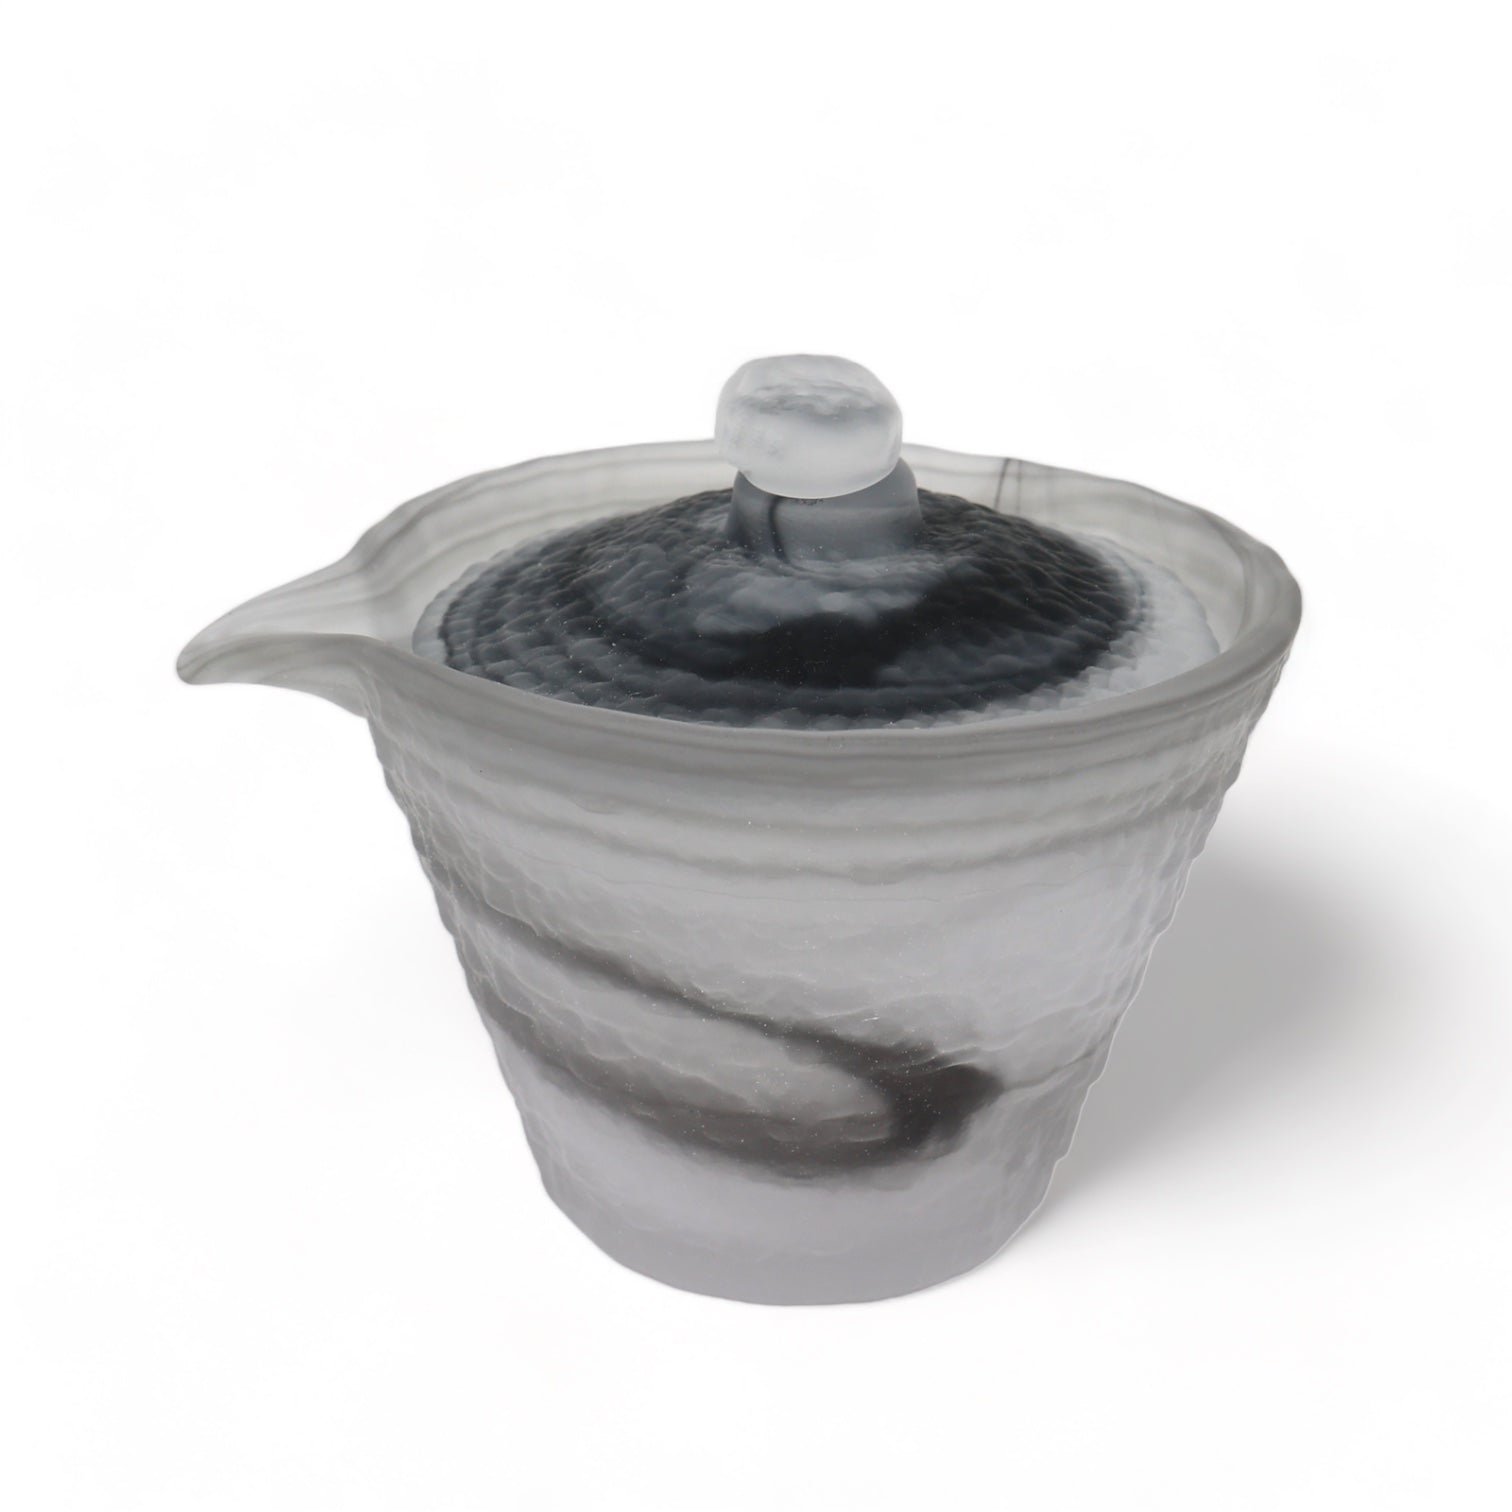 The Ethereal Mist Spouted Gaiwan